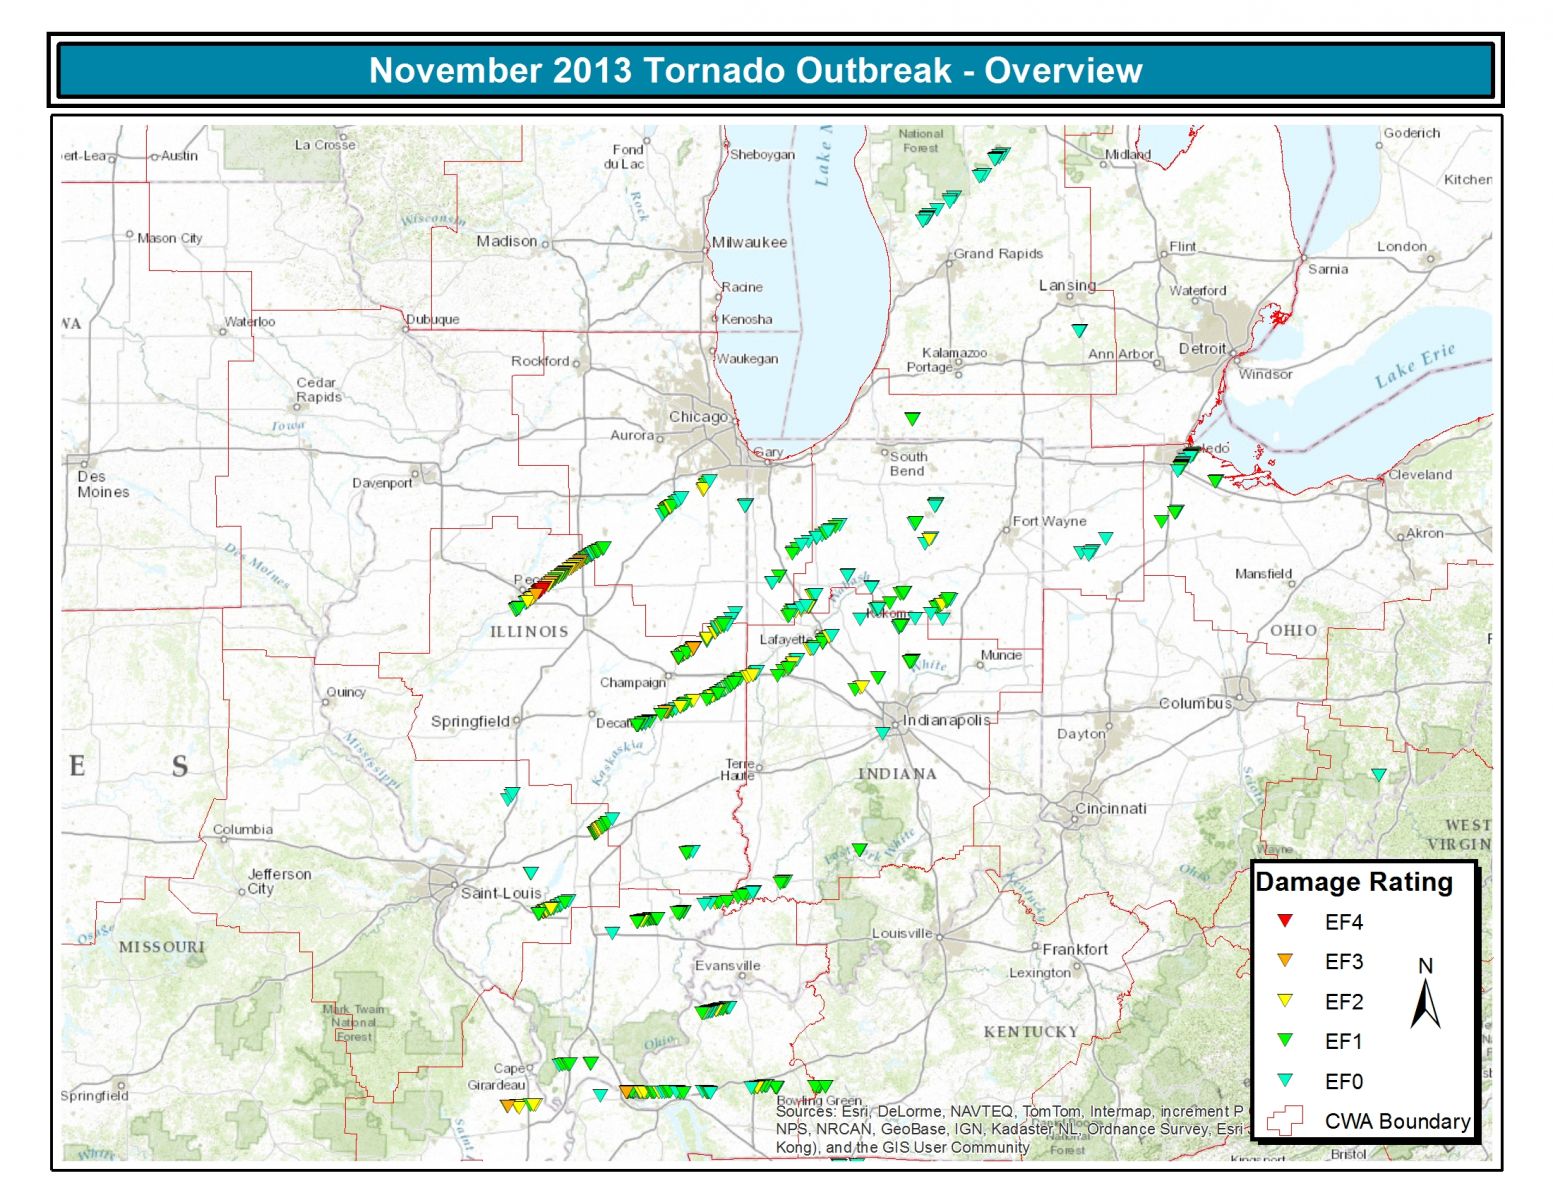 Tornado track overview.  Click image to enlarge.